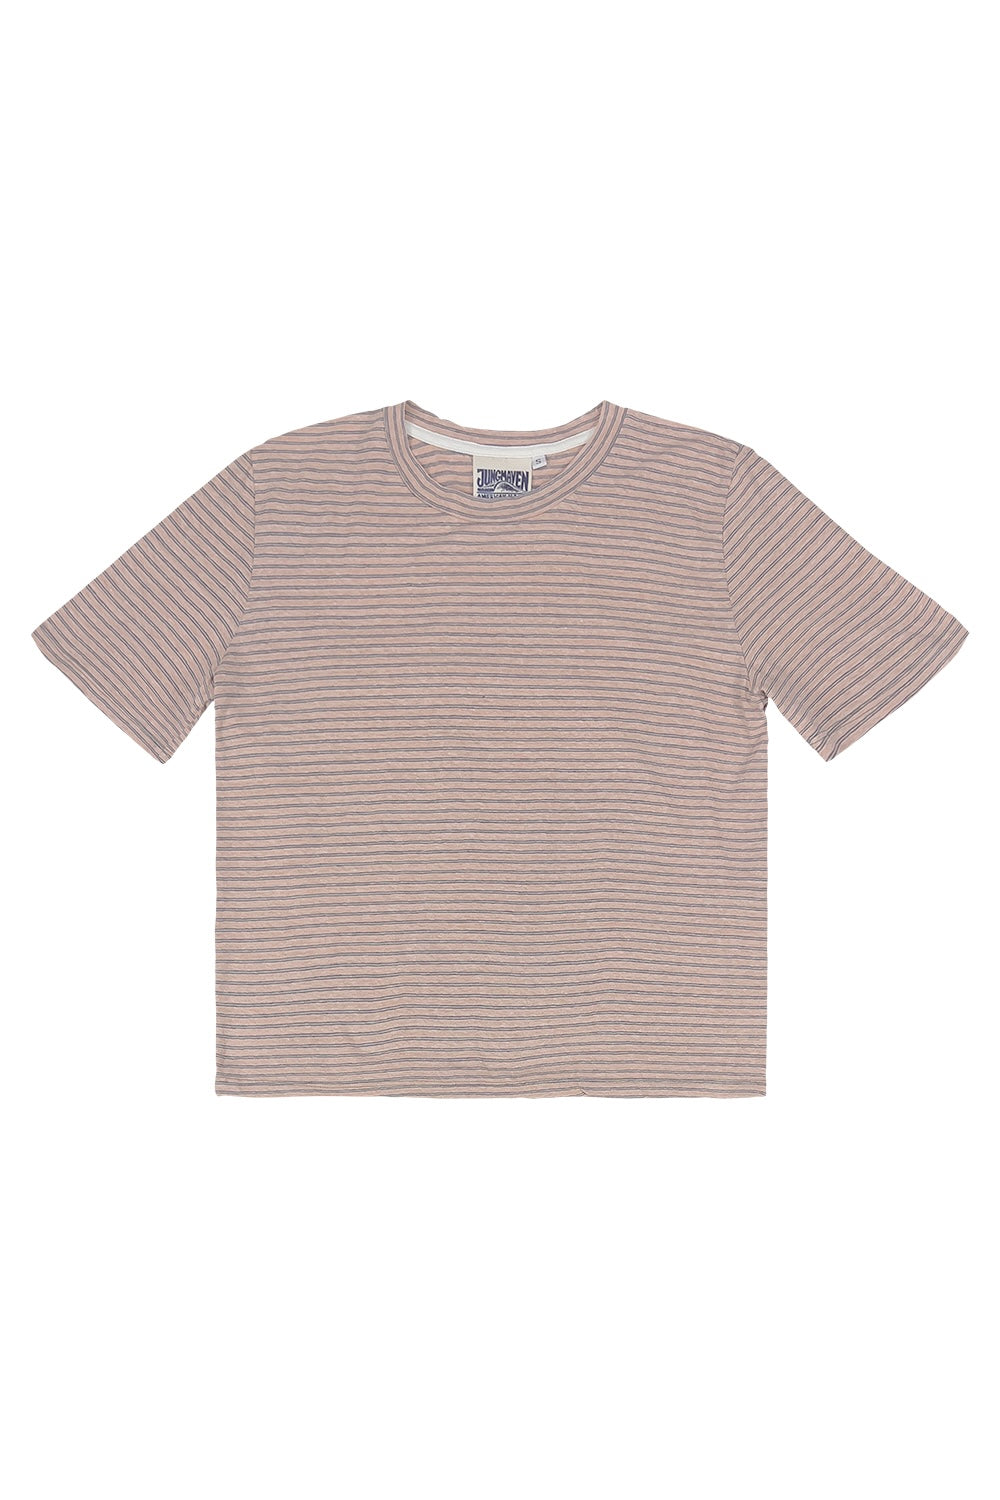 Stripe Silverlake Cropped Tee | Jungmaven Hemp Clothing & Accessories / Color: Pink/Blue/Canvas Thin Stripe